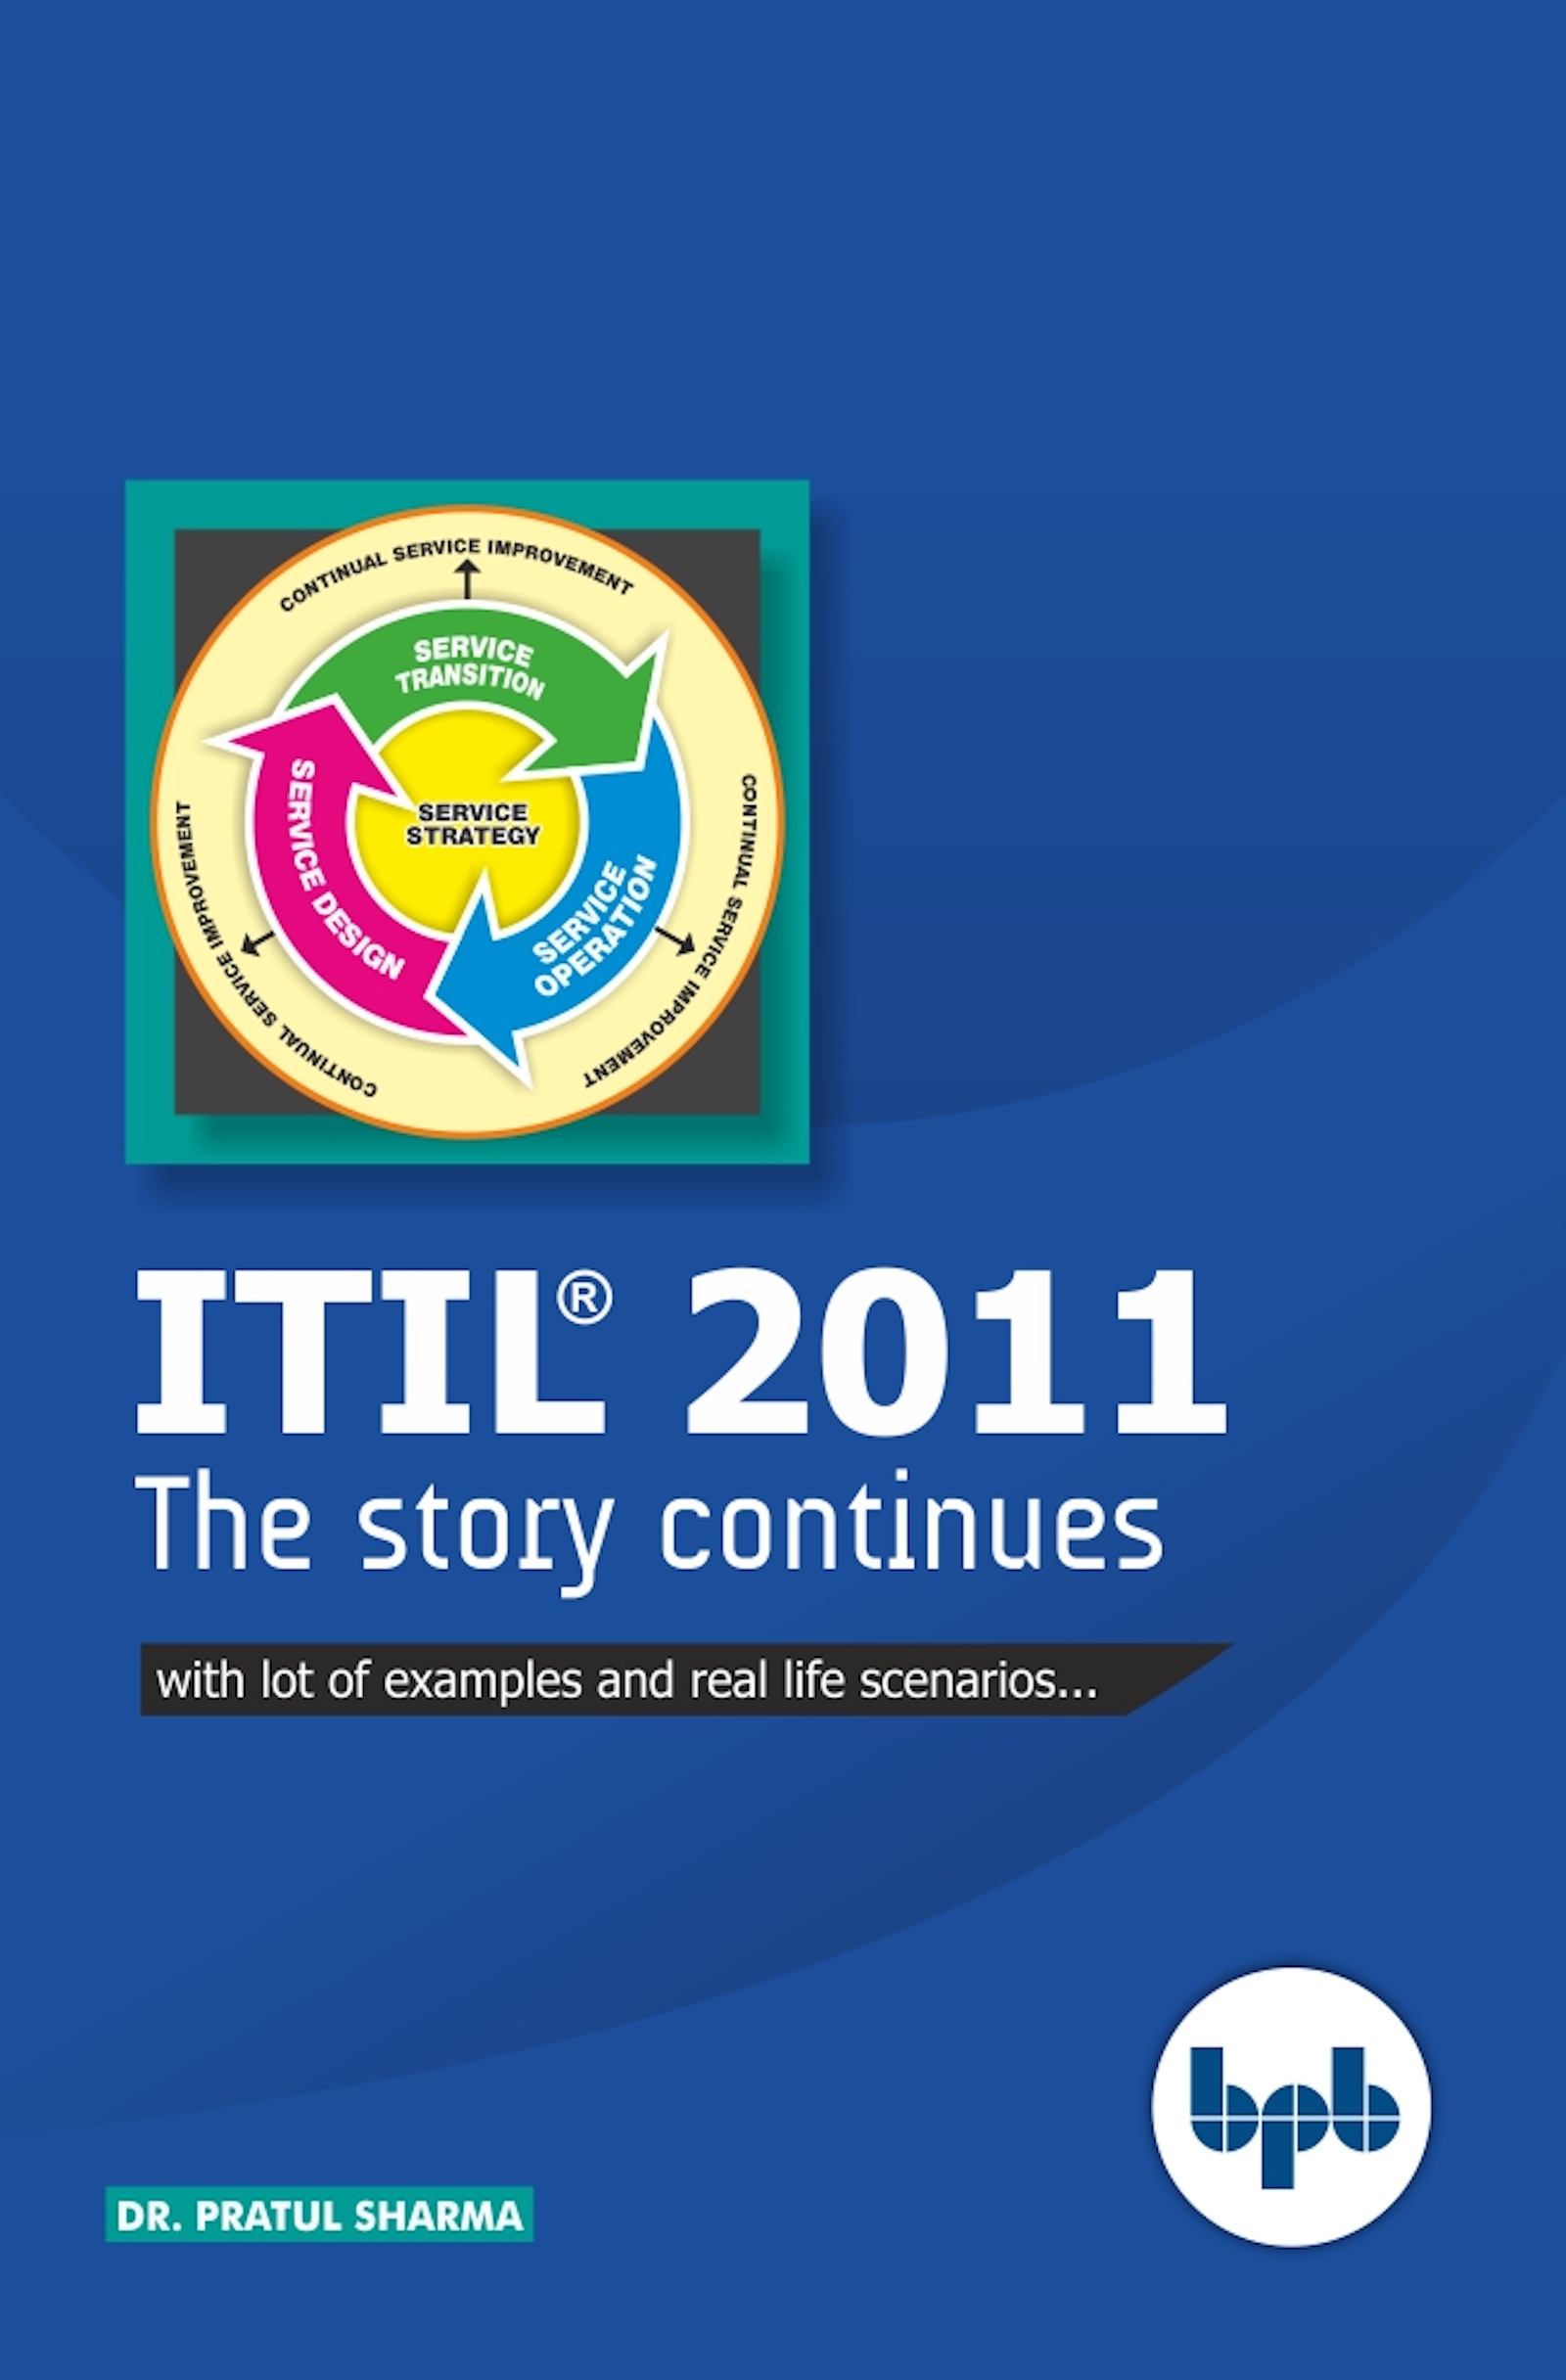 ITIL 2011 The Story Continues...